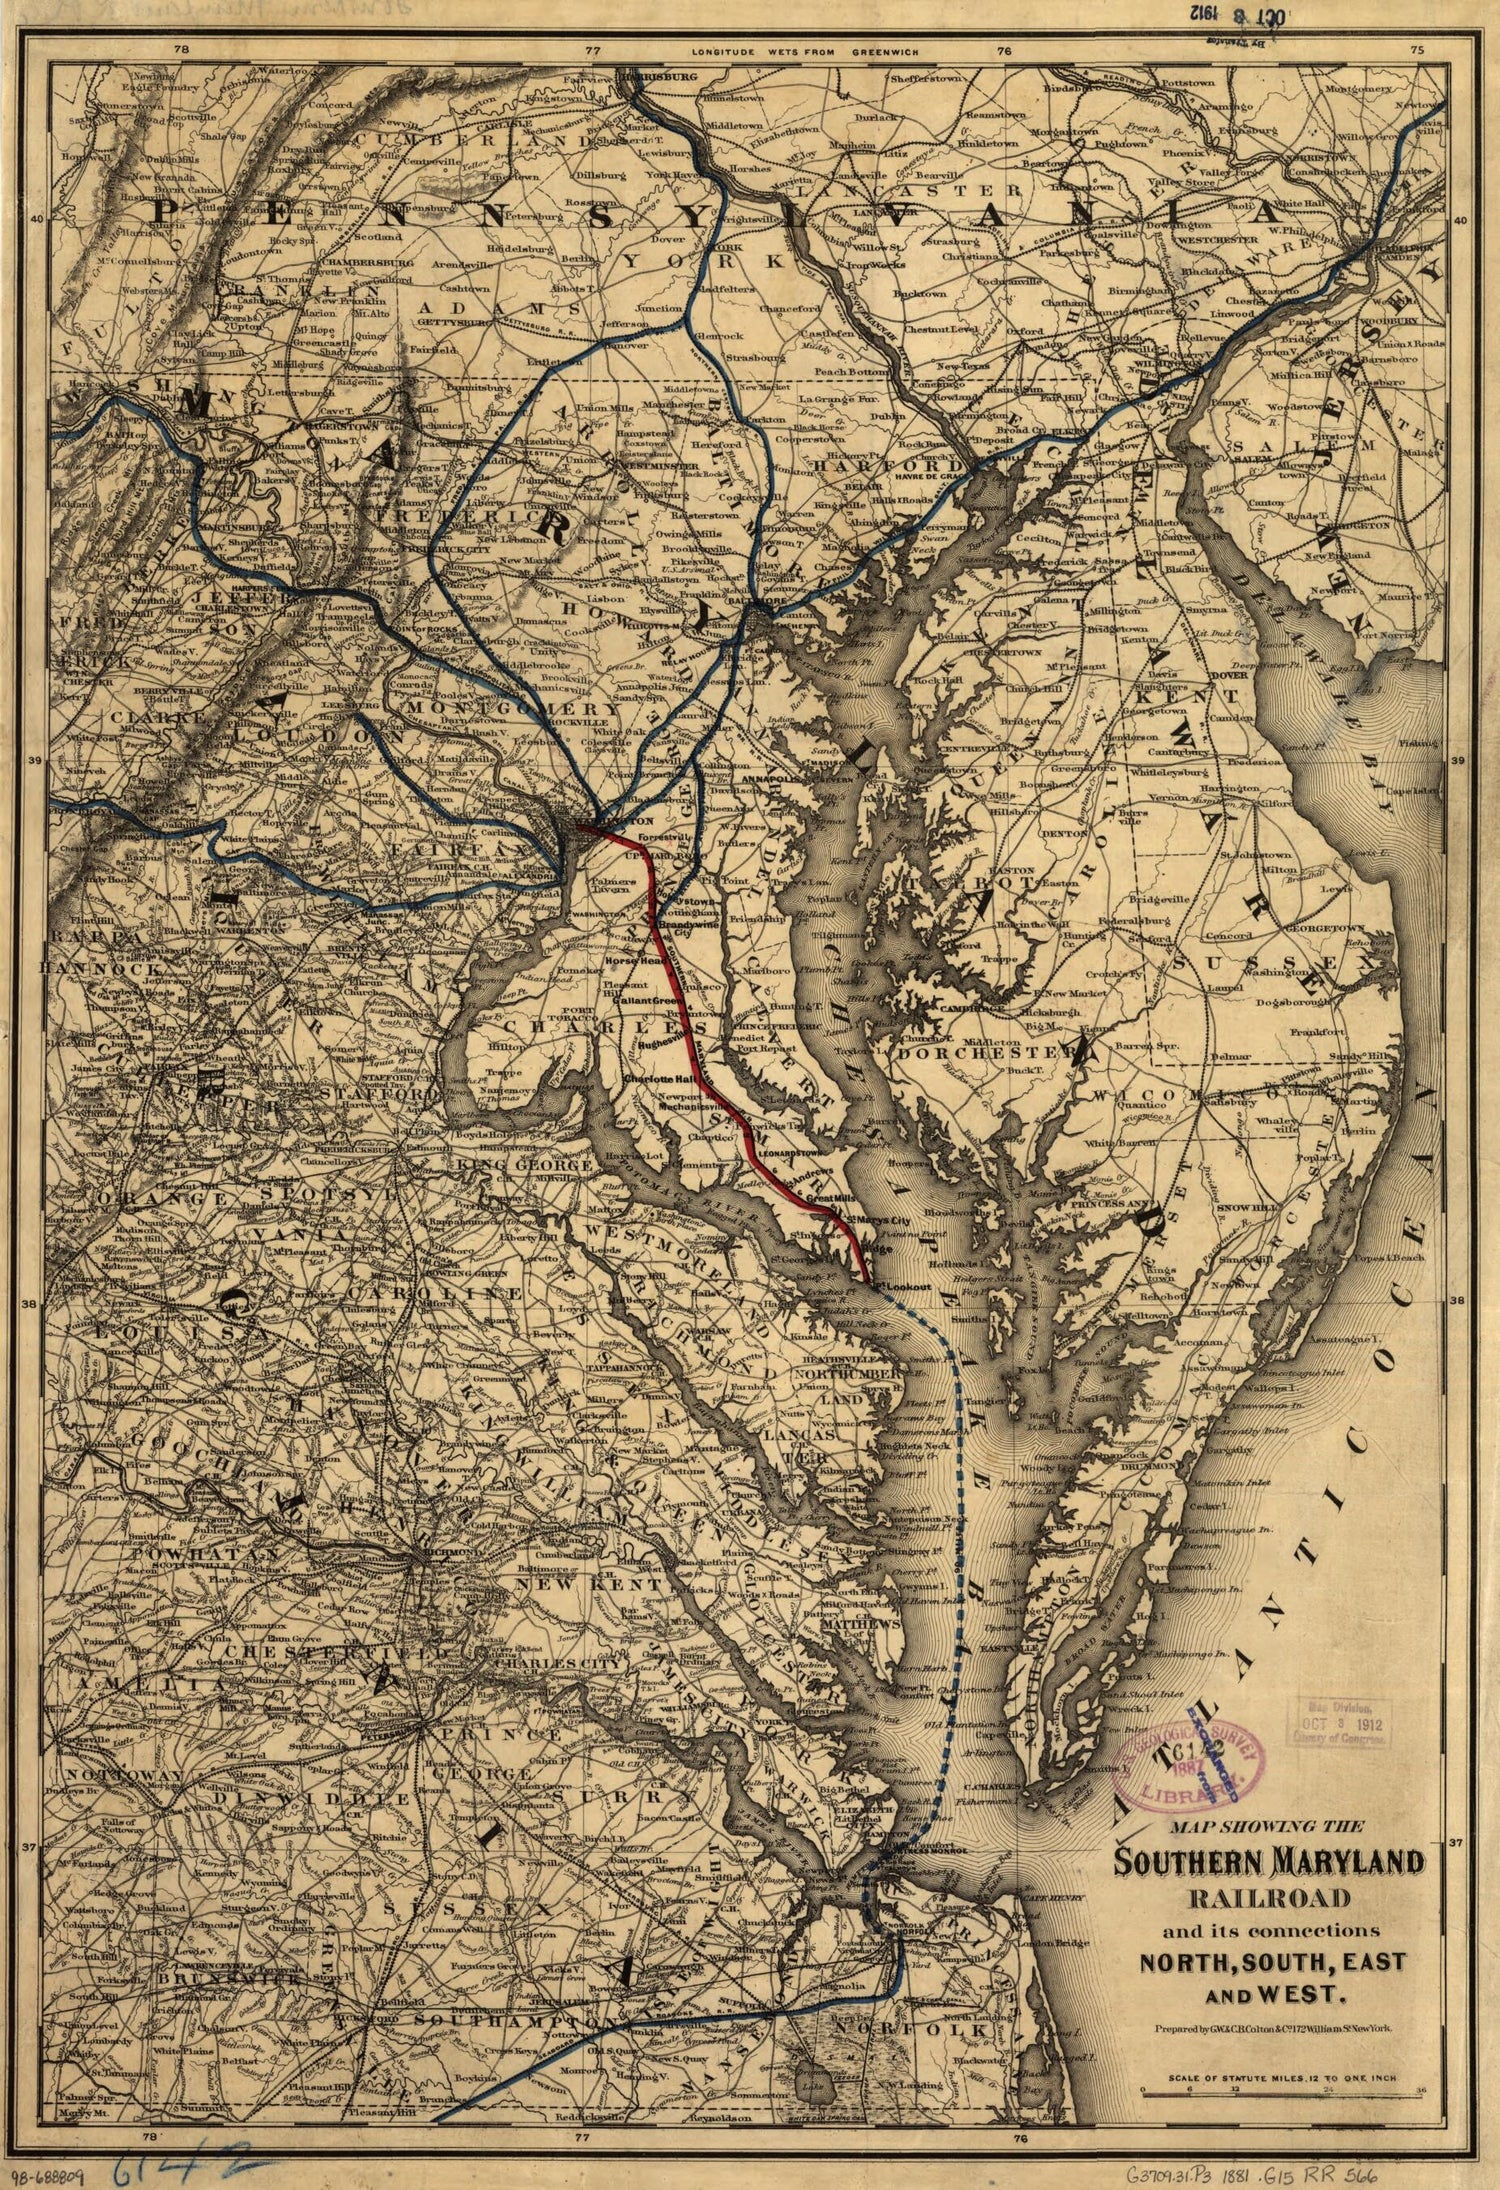 This old map of Map Showing the Southern Maryland Railroad and Its Connections North, South, East, and West from 1881 was created by  G.W. &amp; C.B. Colton &amp; Co,  Southern Maryland Railroad in 1881